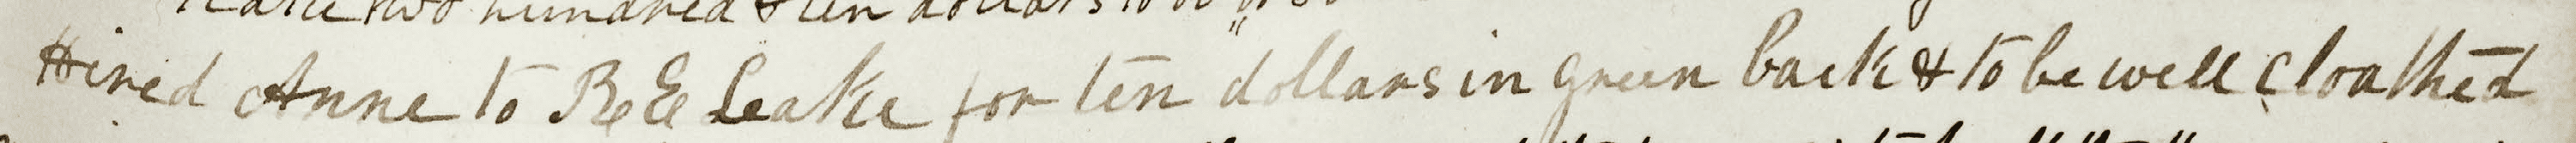 Hired Anne to R E Leake for ten dollars in green back + to be well cloathed. 13 January 1865